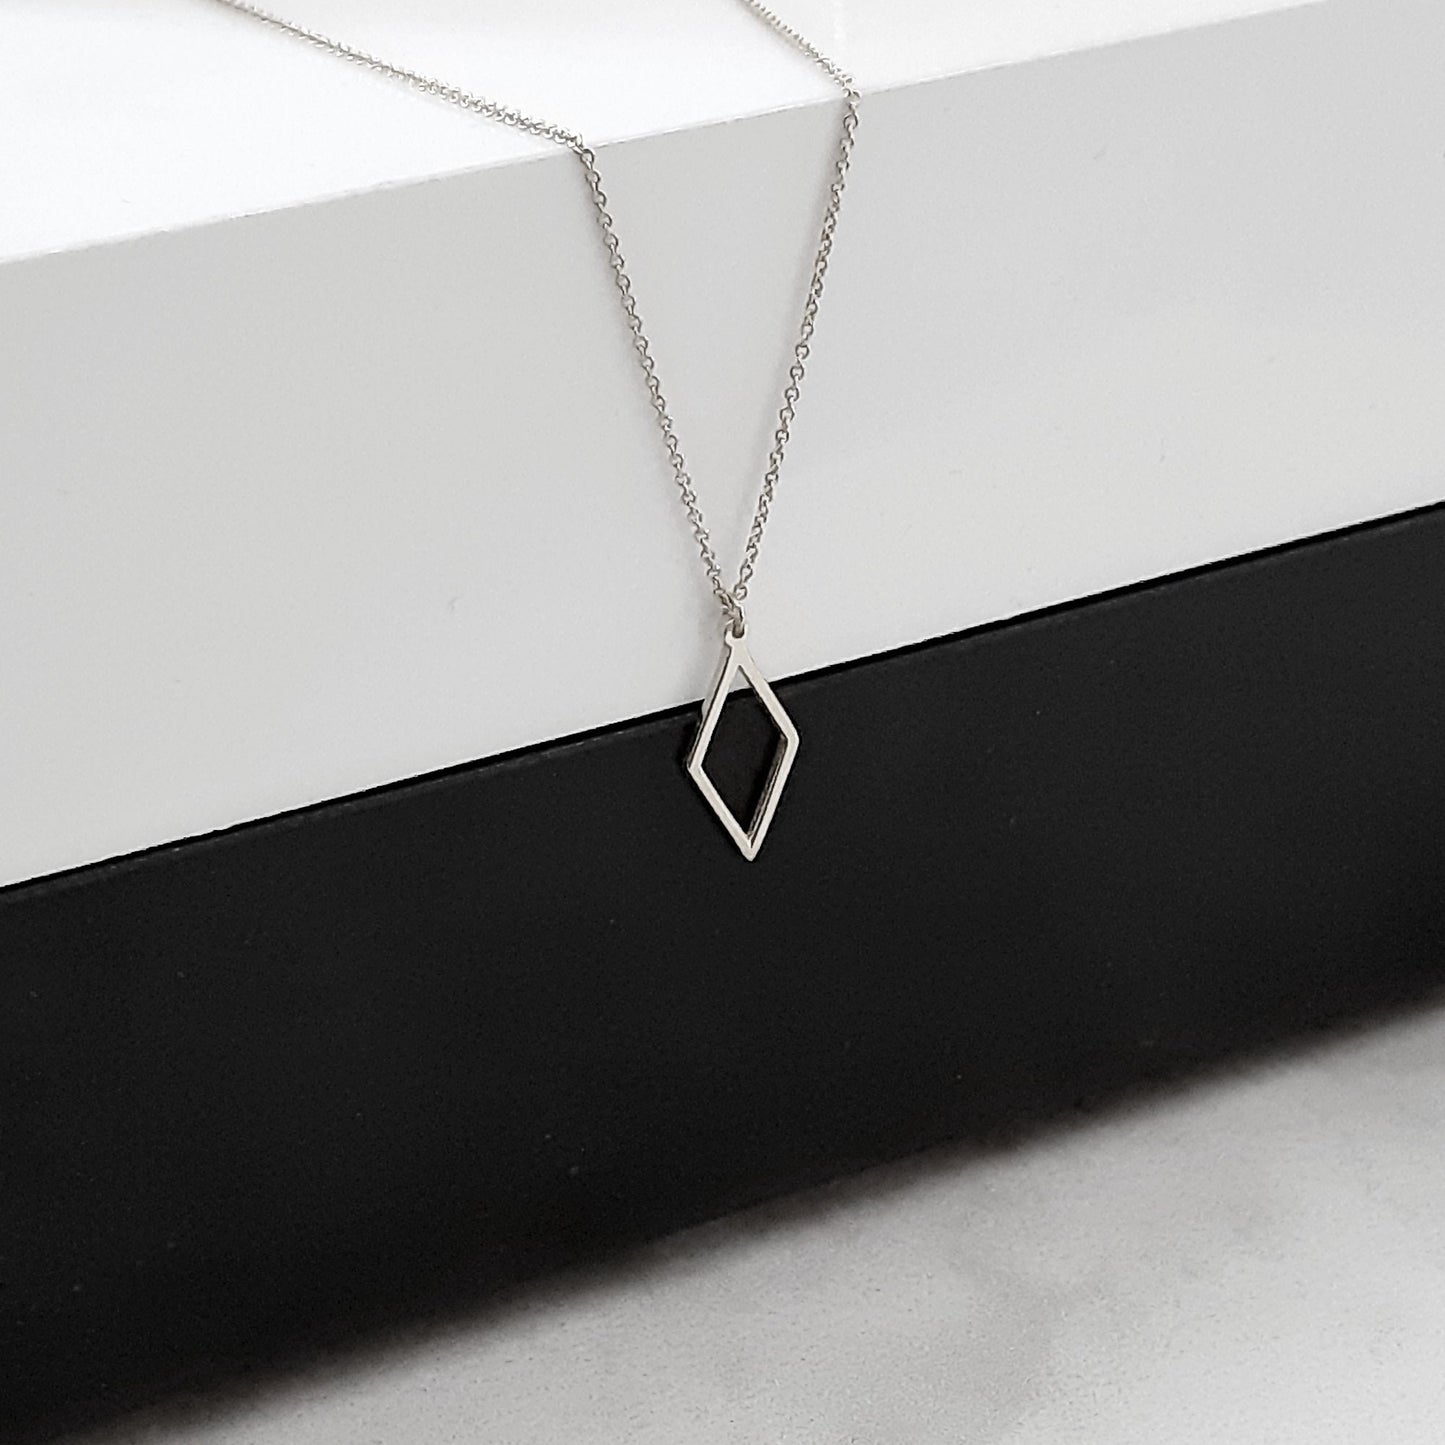 14k yellow Gold rhombus necklace, solid gold Dainty Thin chain, rhombus layering necklace, Minimalist necklace solid gold layered necklace